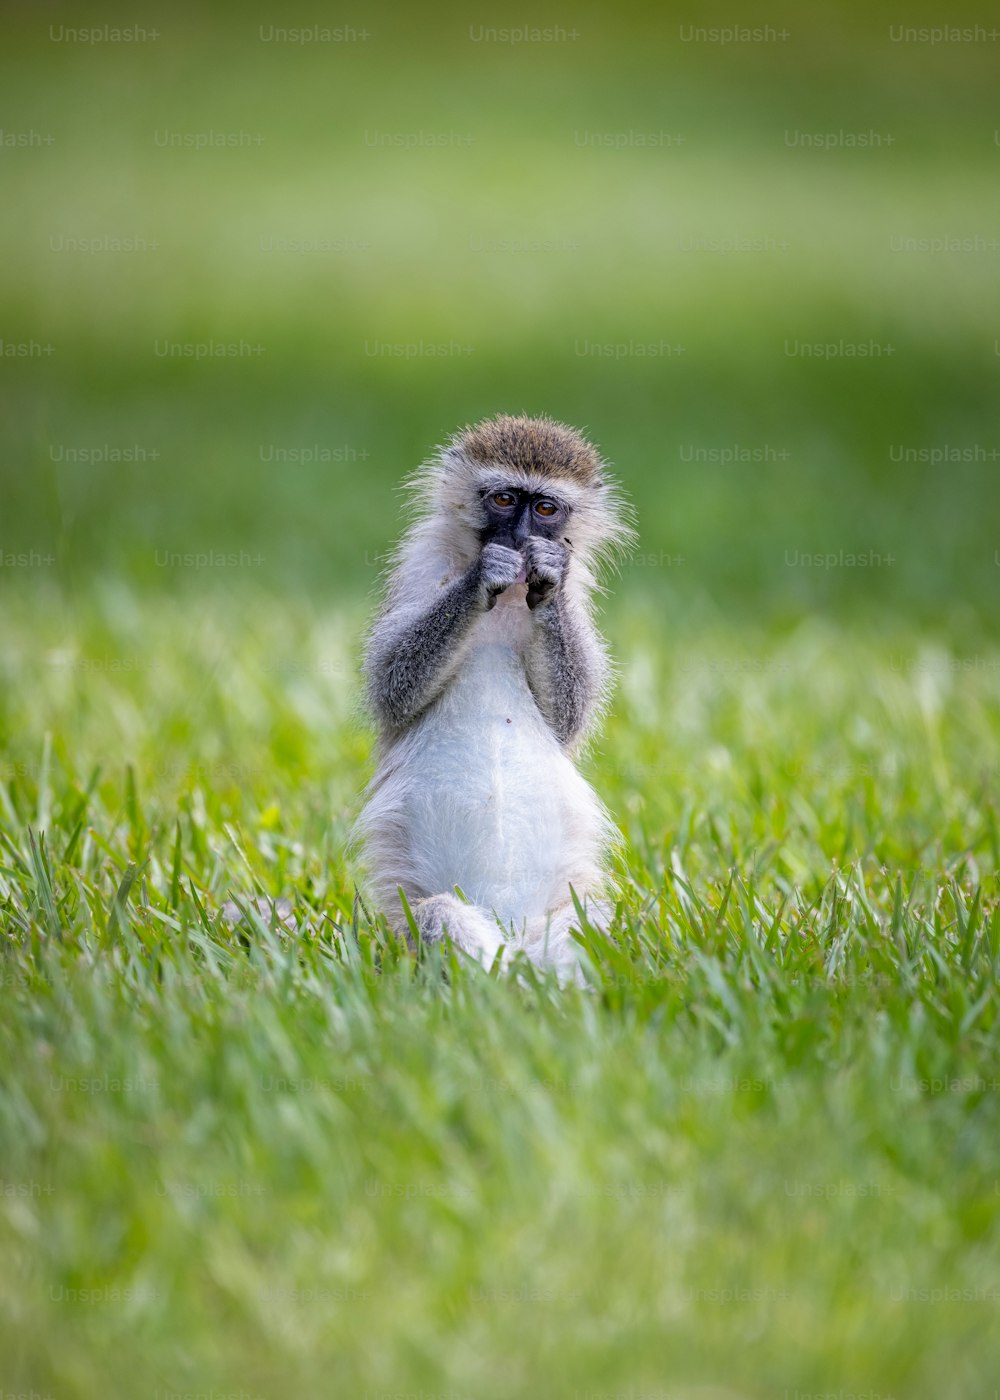 a monkey sitting in the grass with its mouth open